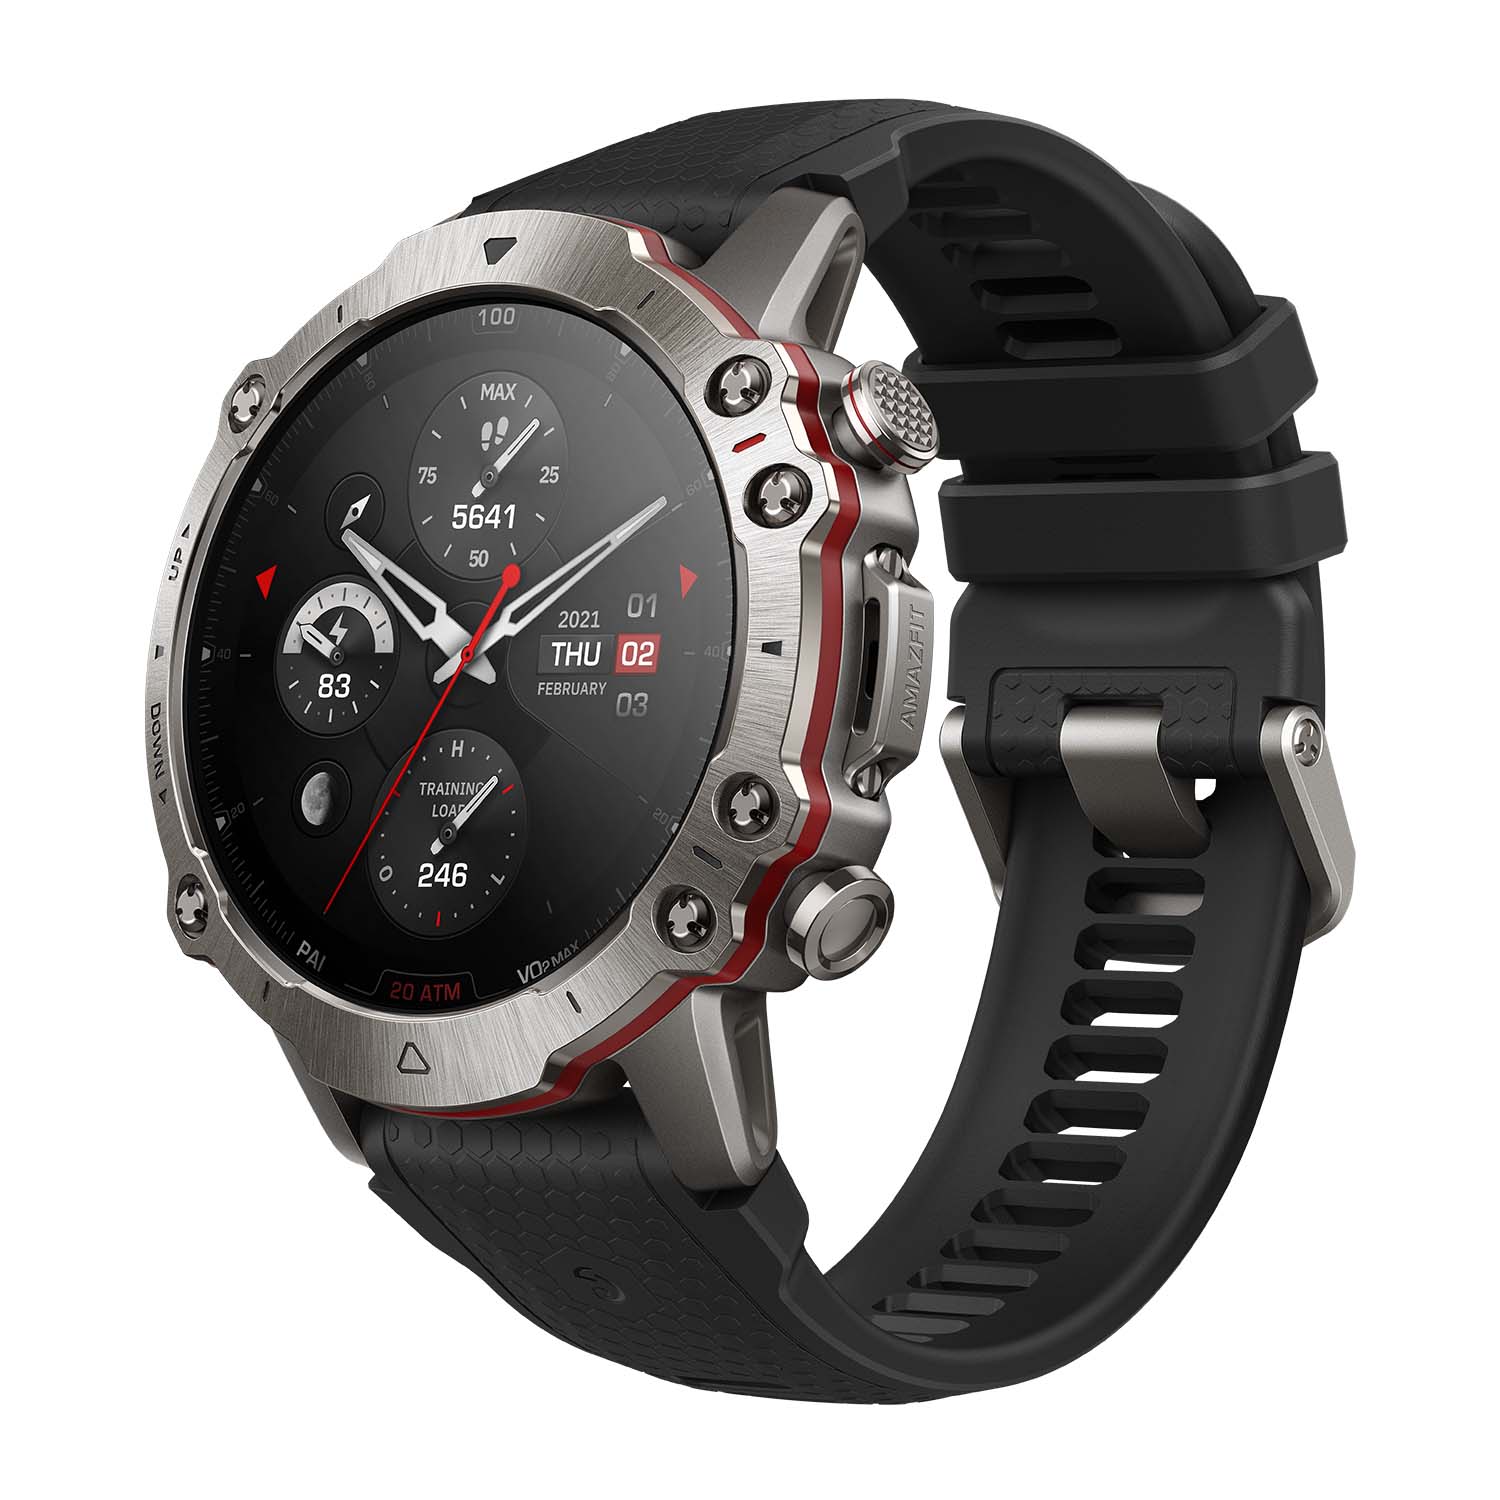 Amazfit Falcon With 150 Sports Modes, 14-Day Battery Life Launched in India